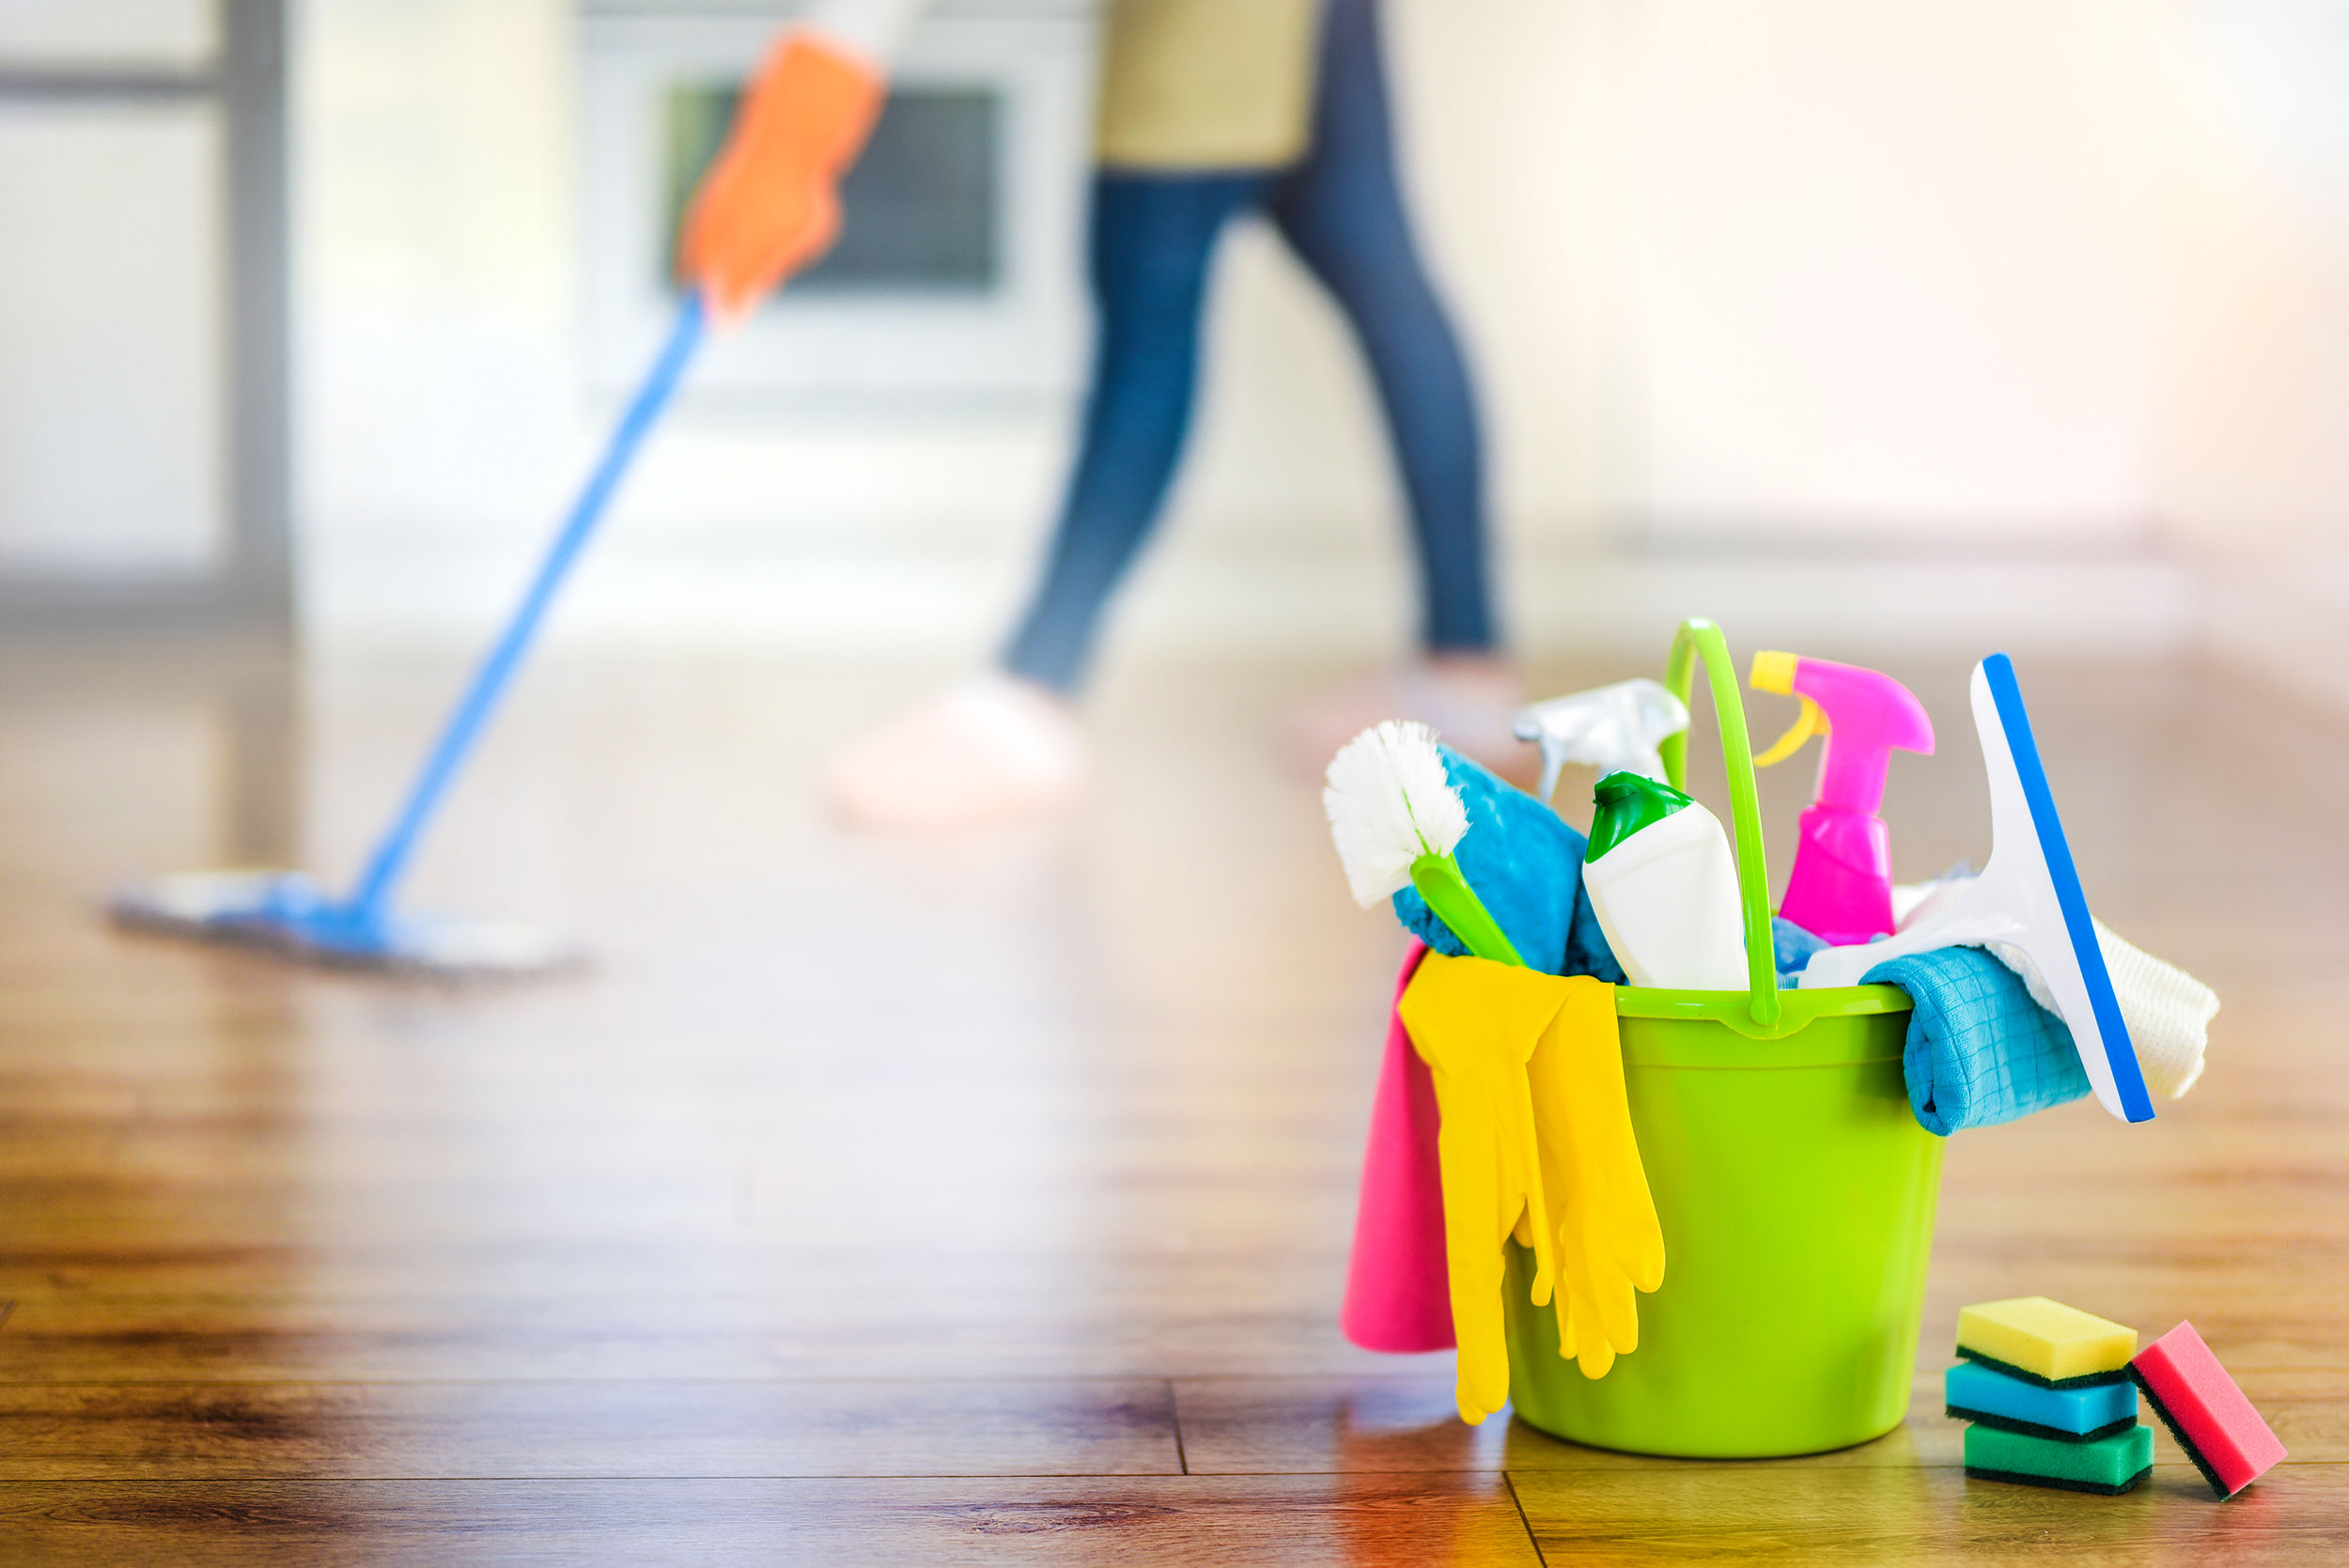 Exit-cleaning-banner-image